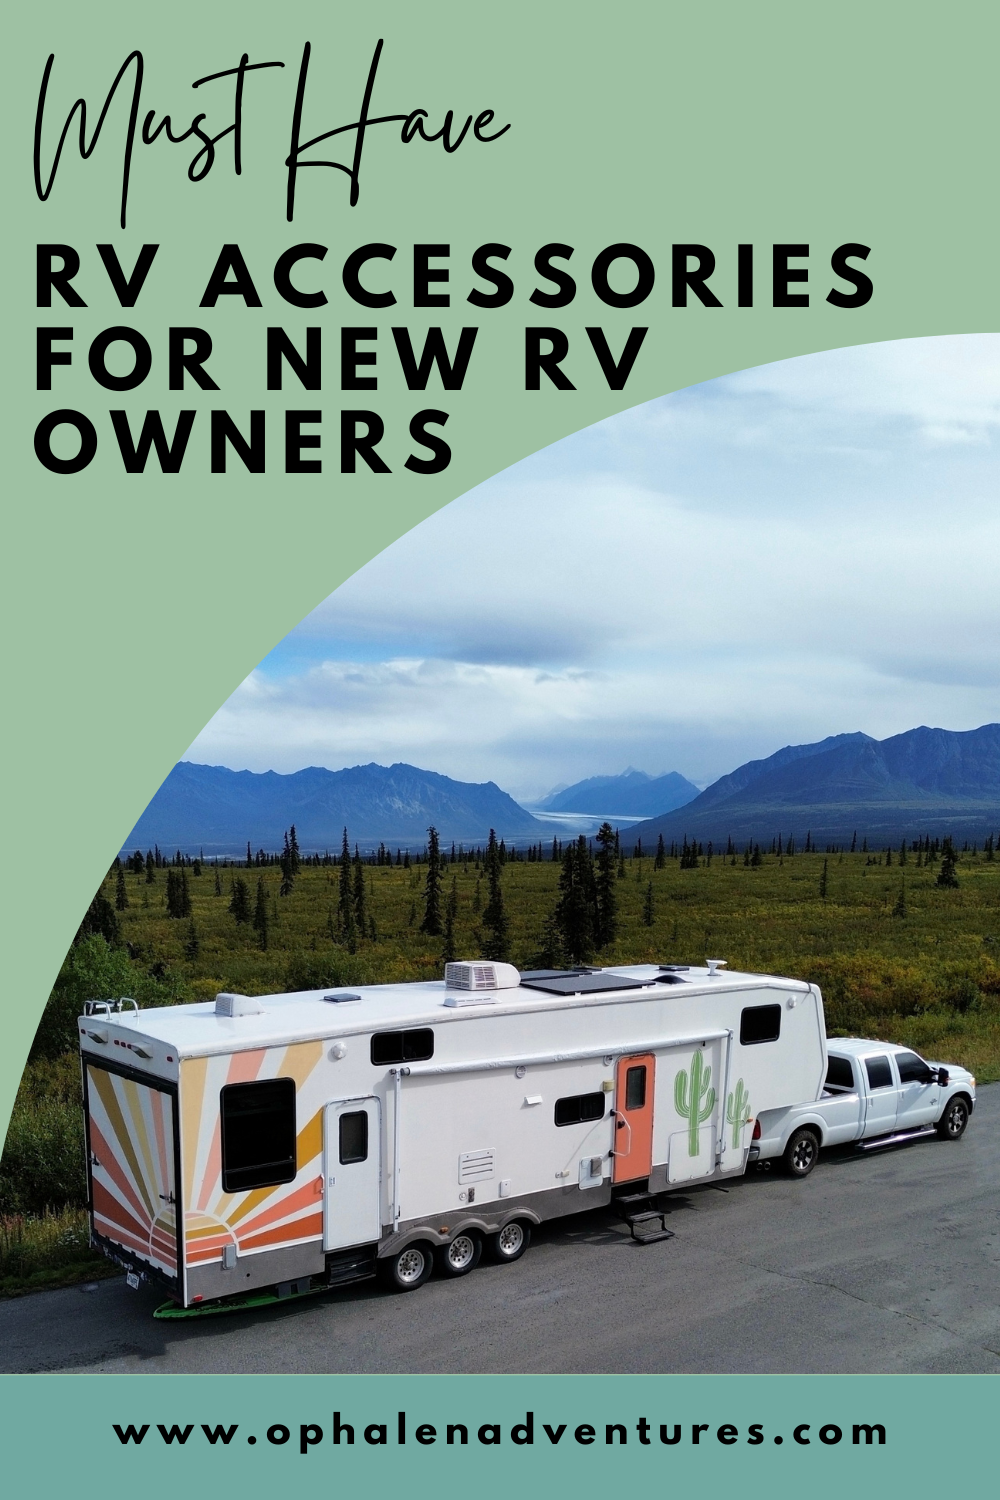 Must Have RV Accessories: The Complete List!